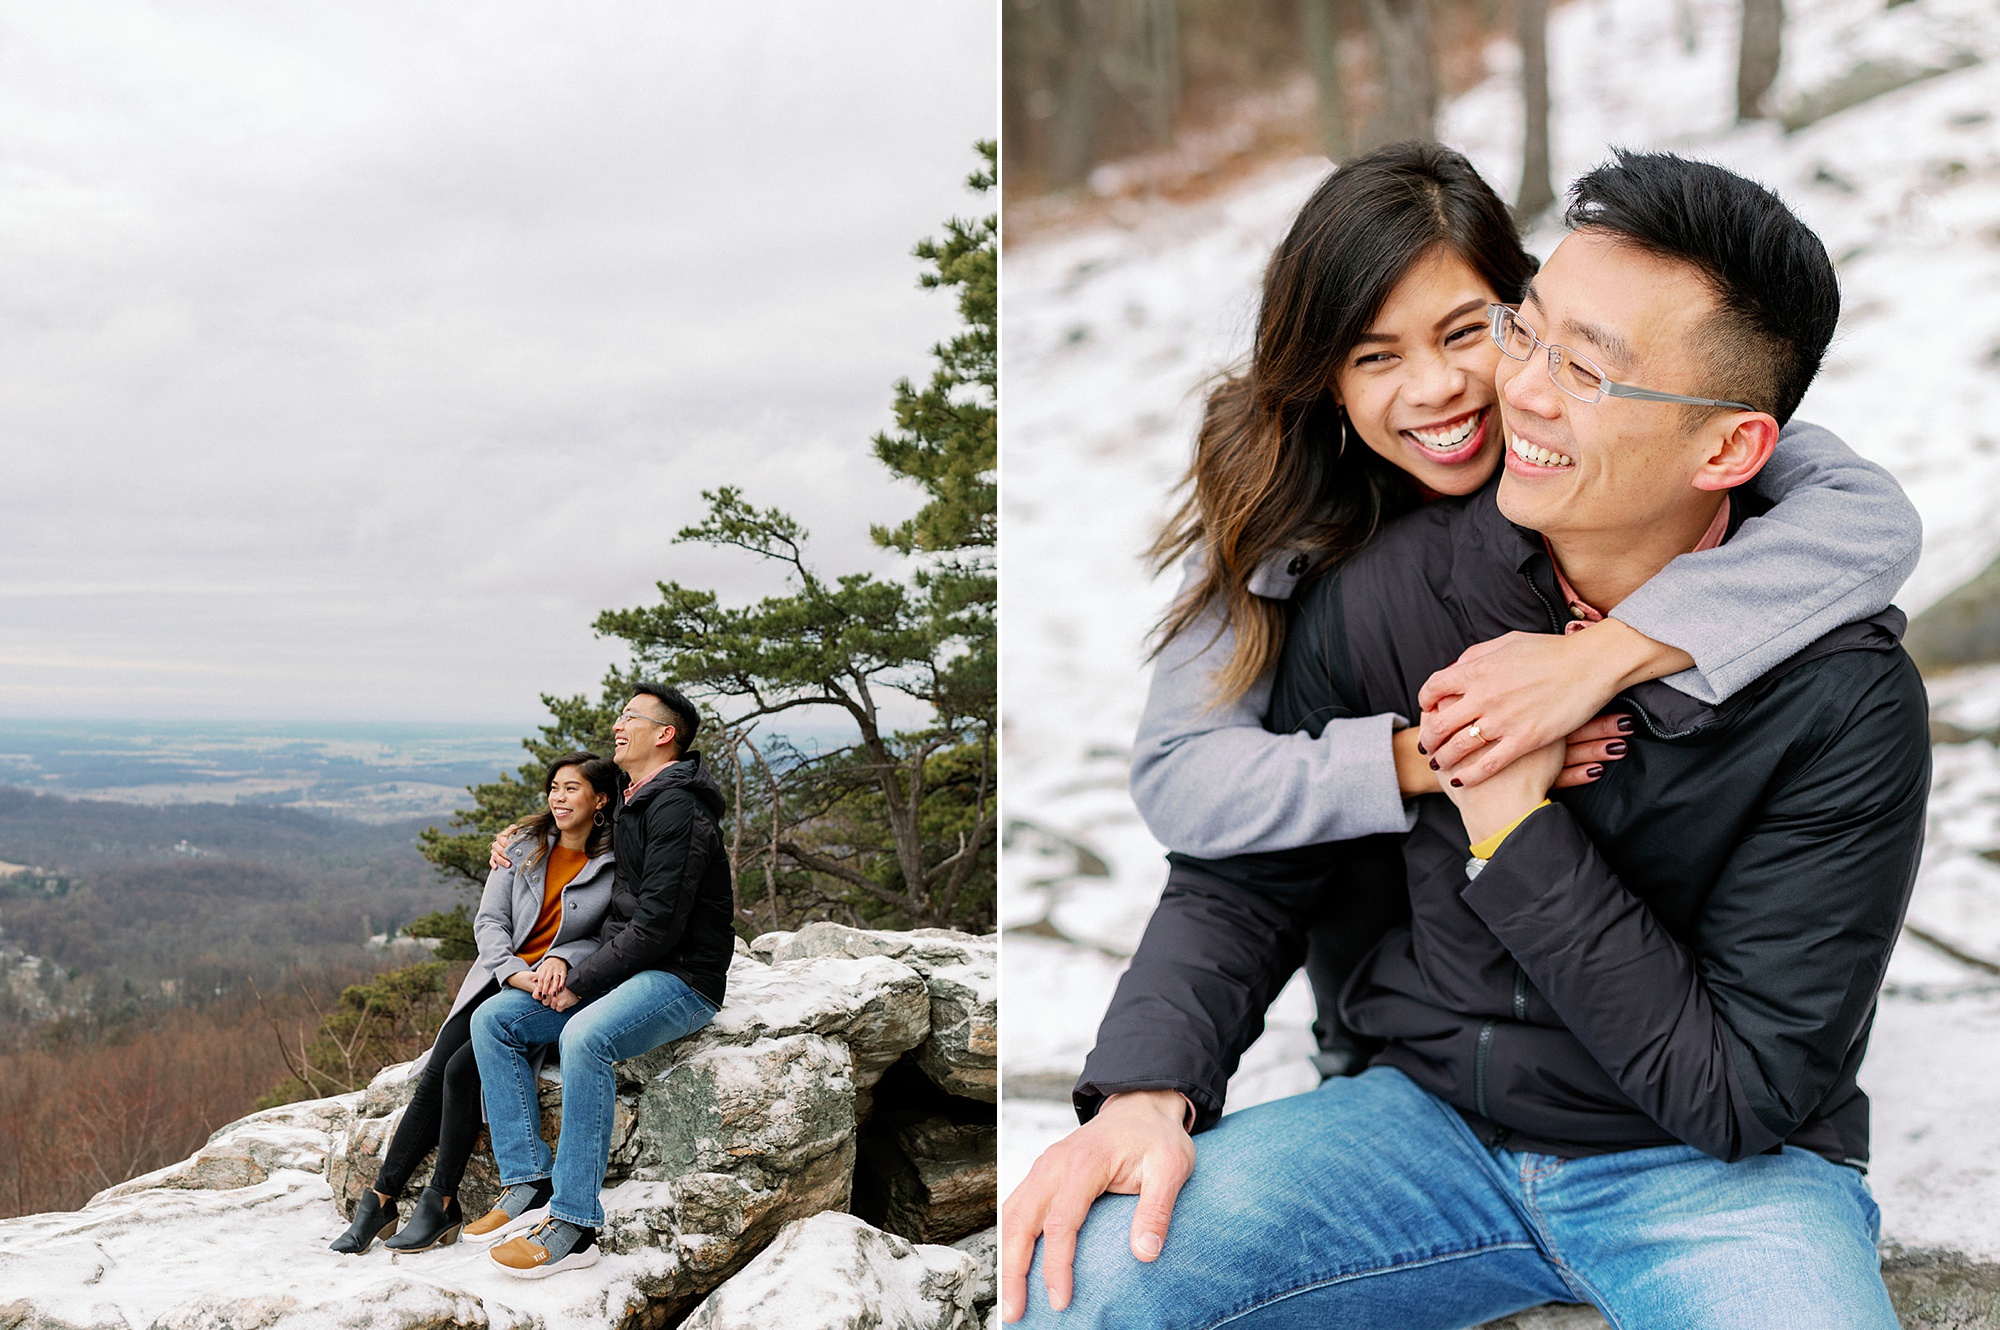 bride hugs groom from behind during Snowy Engagement Session in Bluemont, VA 